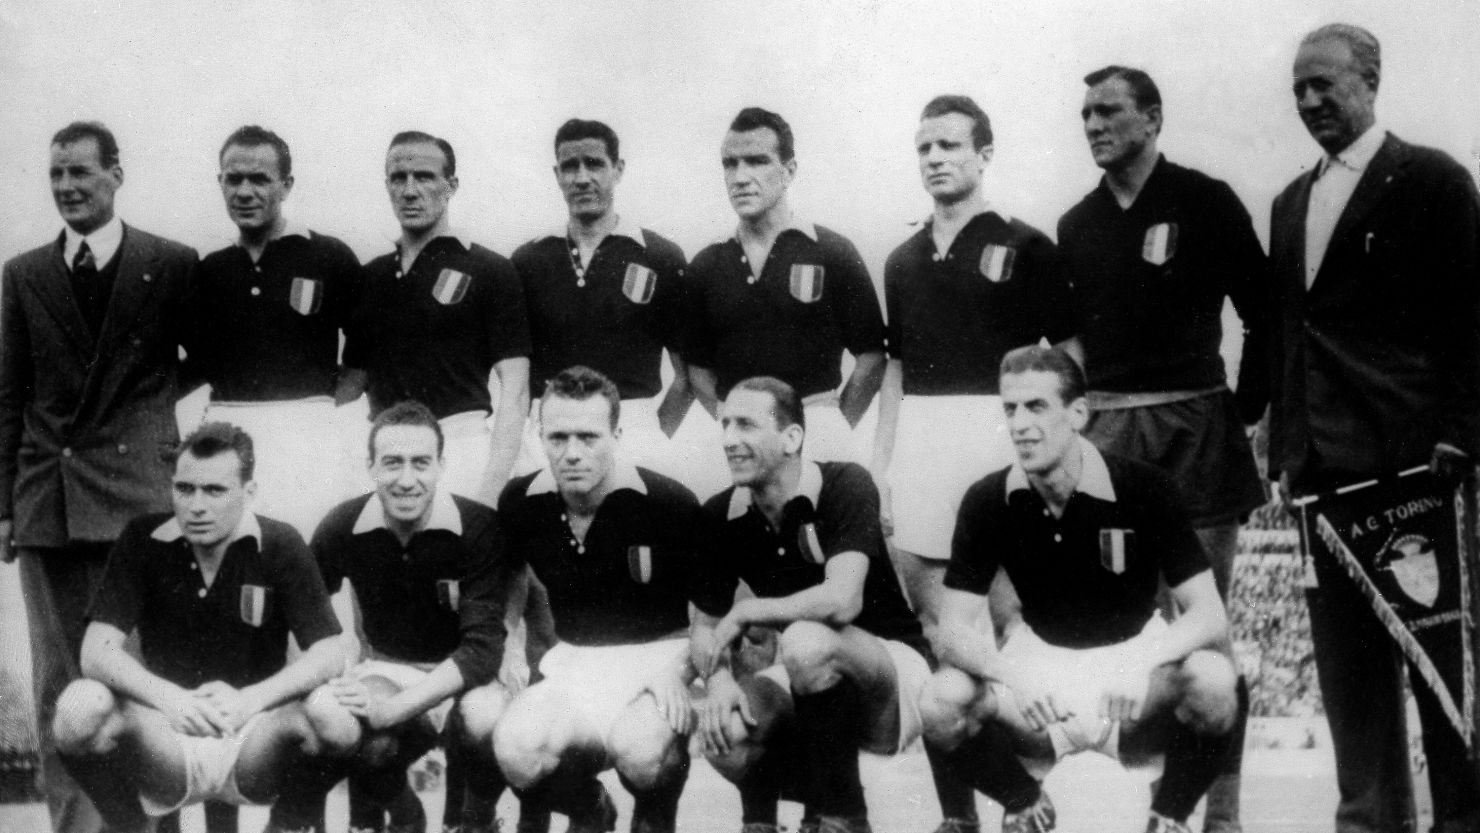 On May 4, 1949 almost the entire Torino football team was killed in a plane crash.